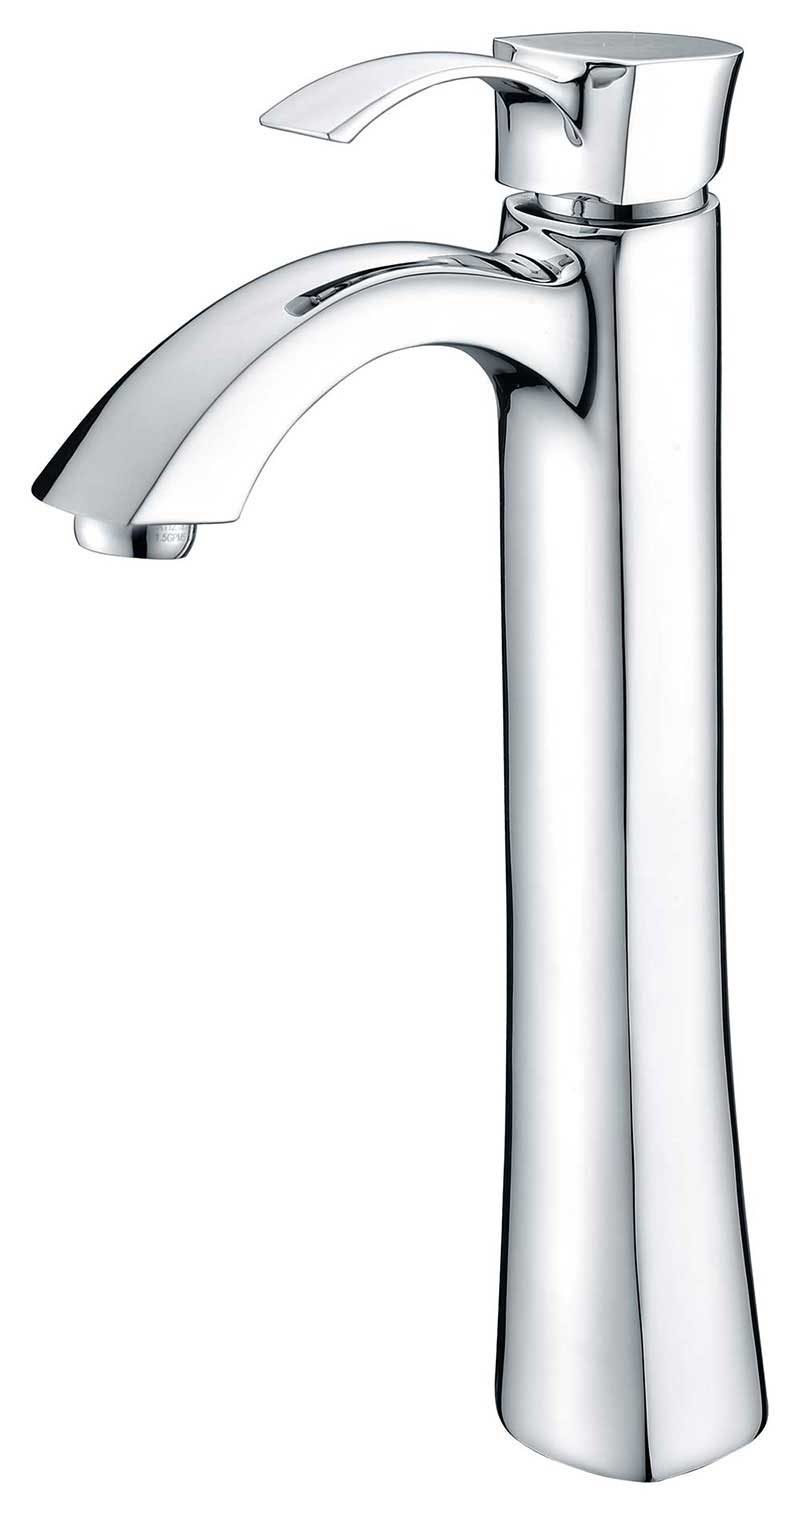 Anzzi Cadenza Series Deco-Glass Vessel Sink in Lustrous Clear with Harmony Faucet in Chrome 3